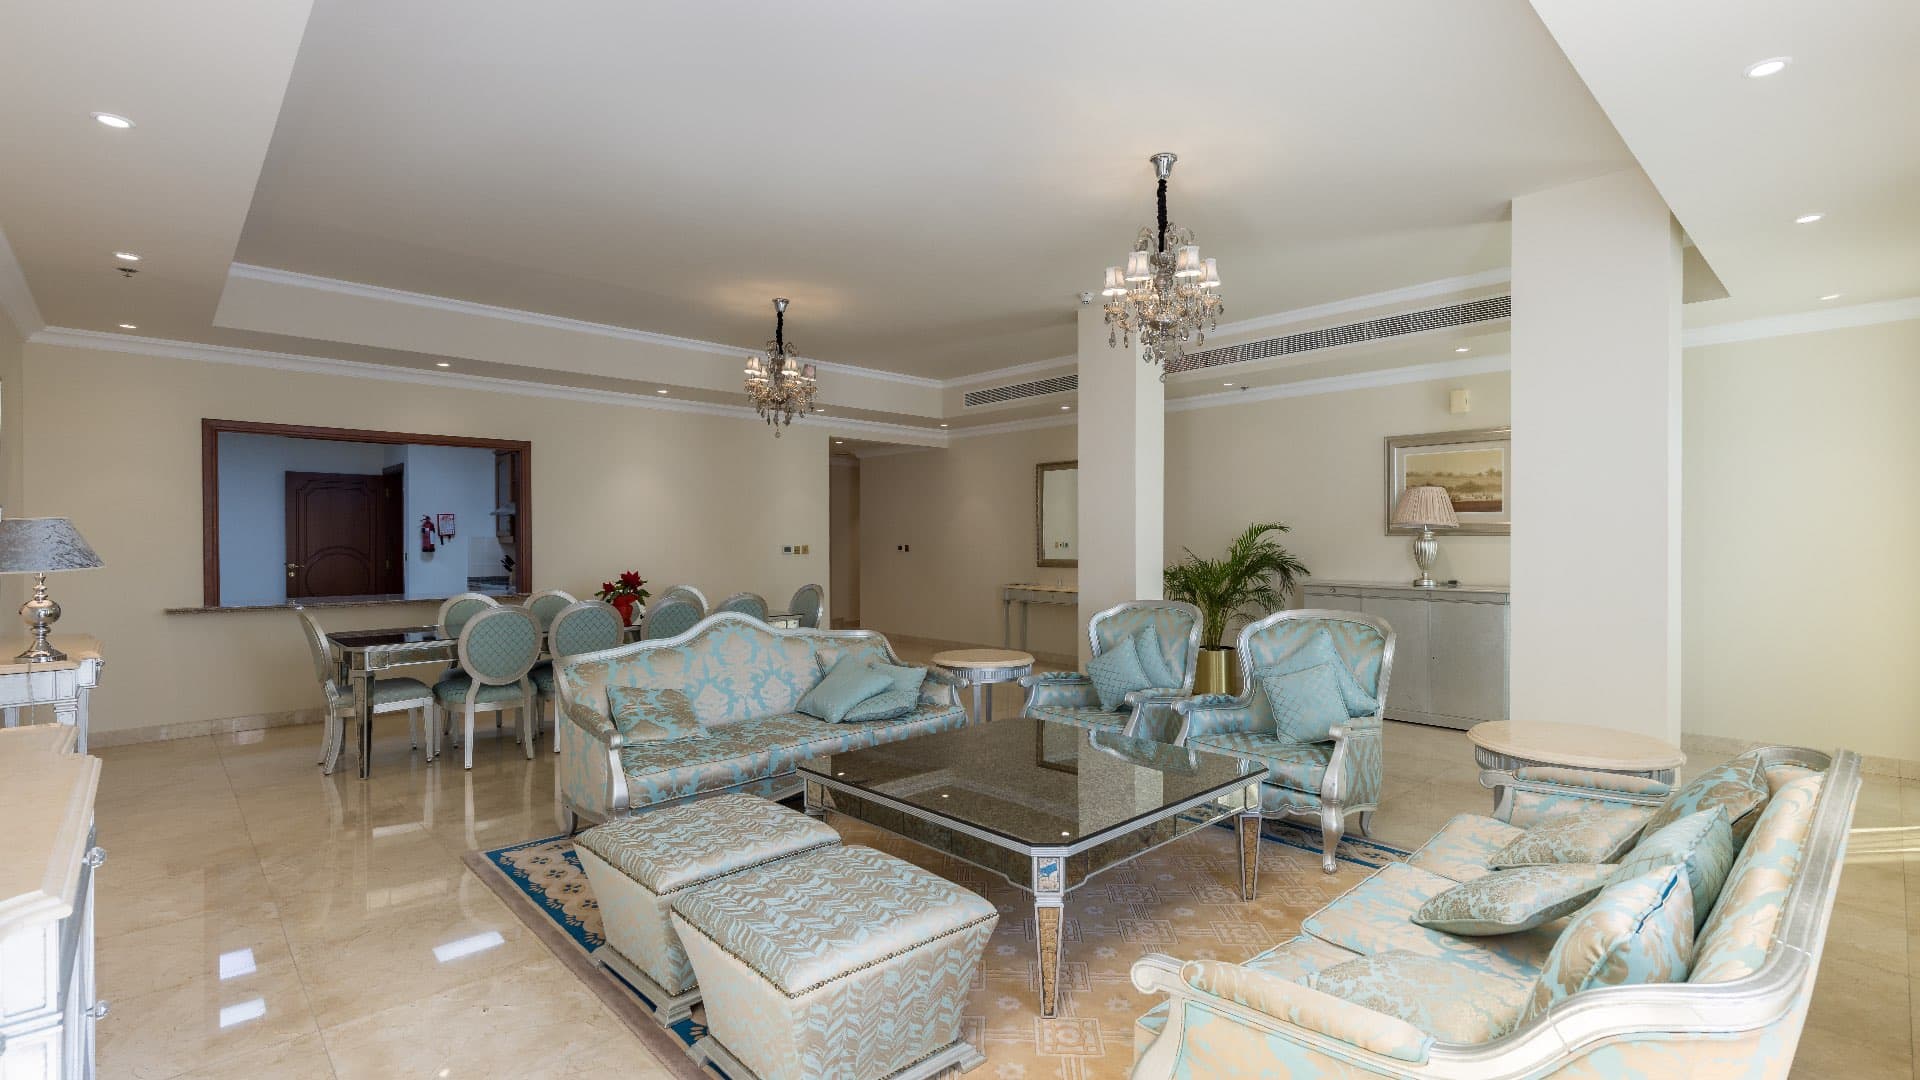 4 Bedroom Apartment For Sale The Crescent Lp10249 20c4f0353f092a00.jpg